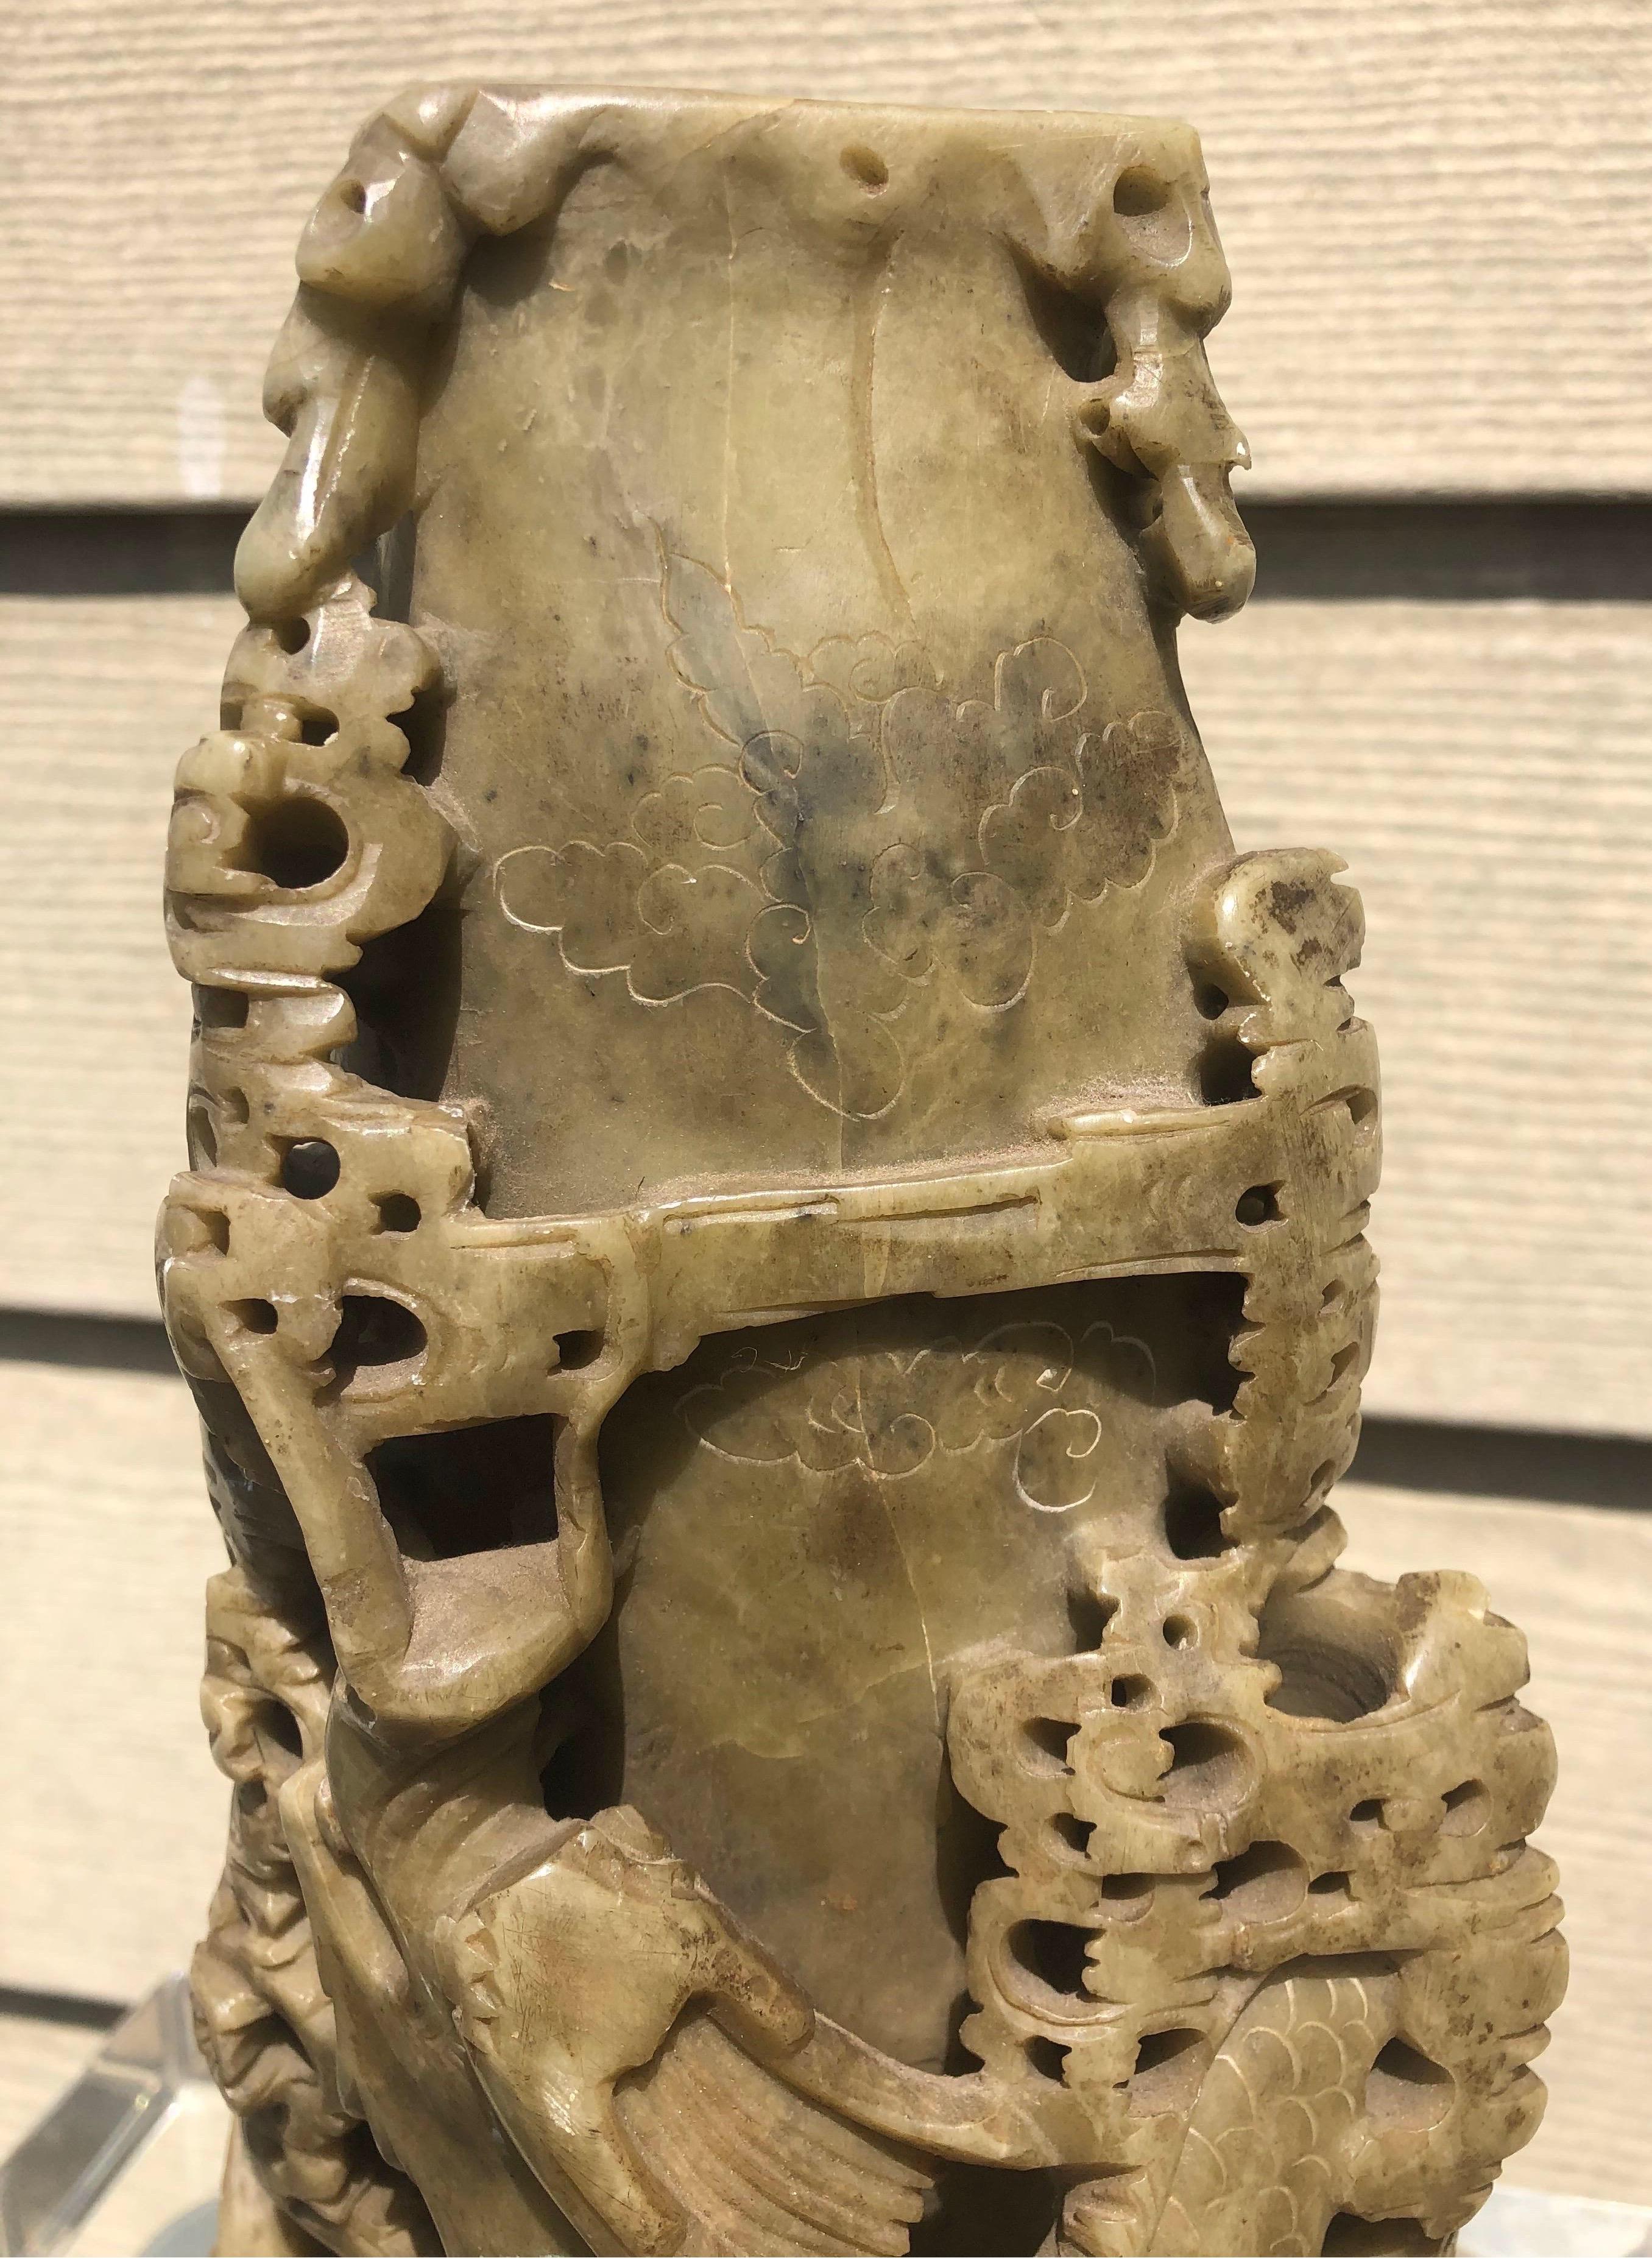 Late 19th-early 20th century Chinese carved soapstone vase with dragons.